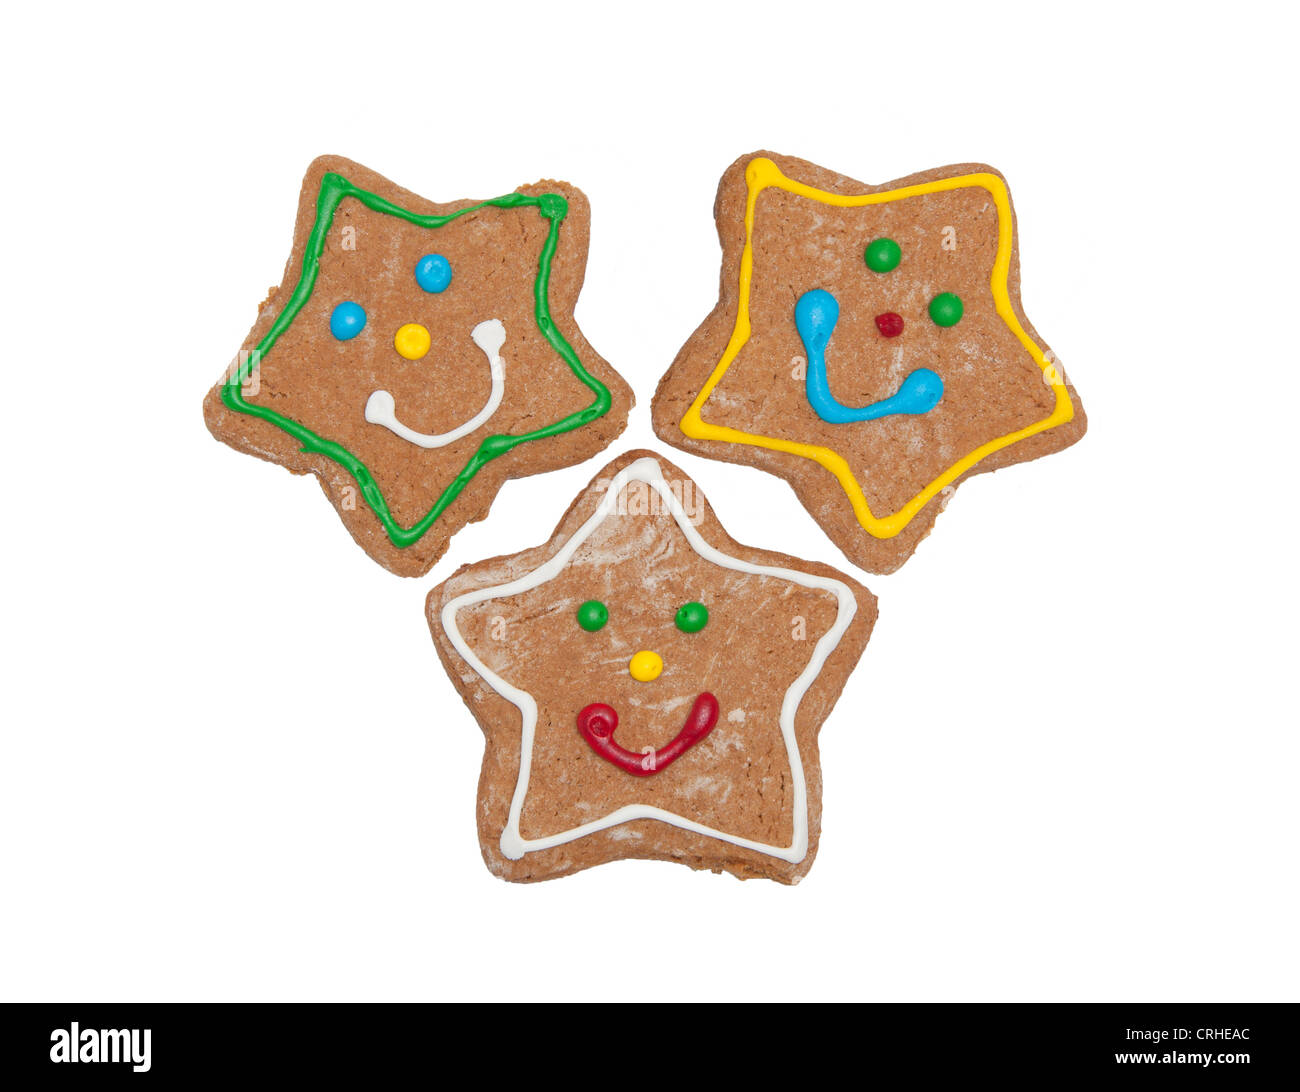 Thee Christmas gingerbread star cookies with colorful, happy icing, on white Stock Photo